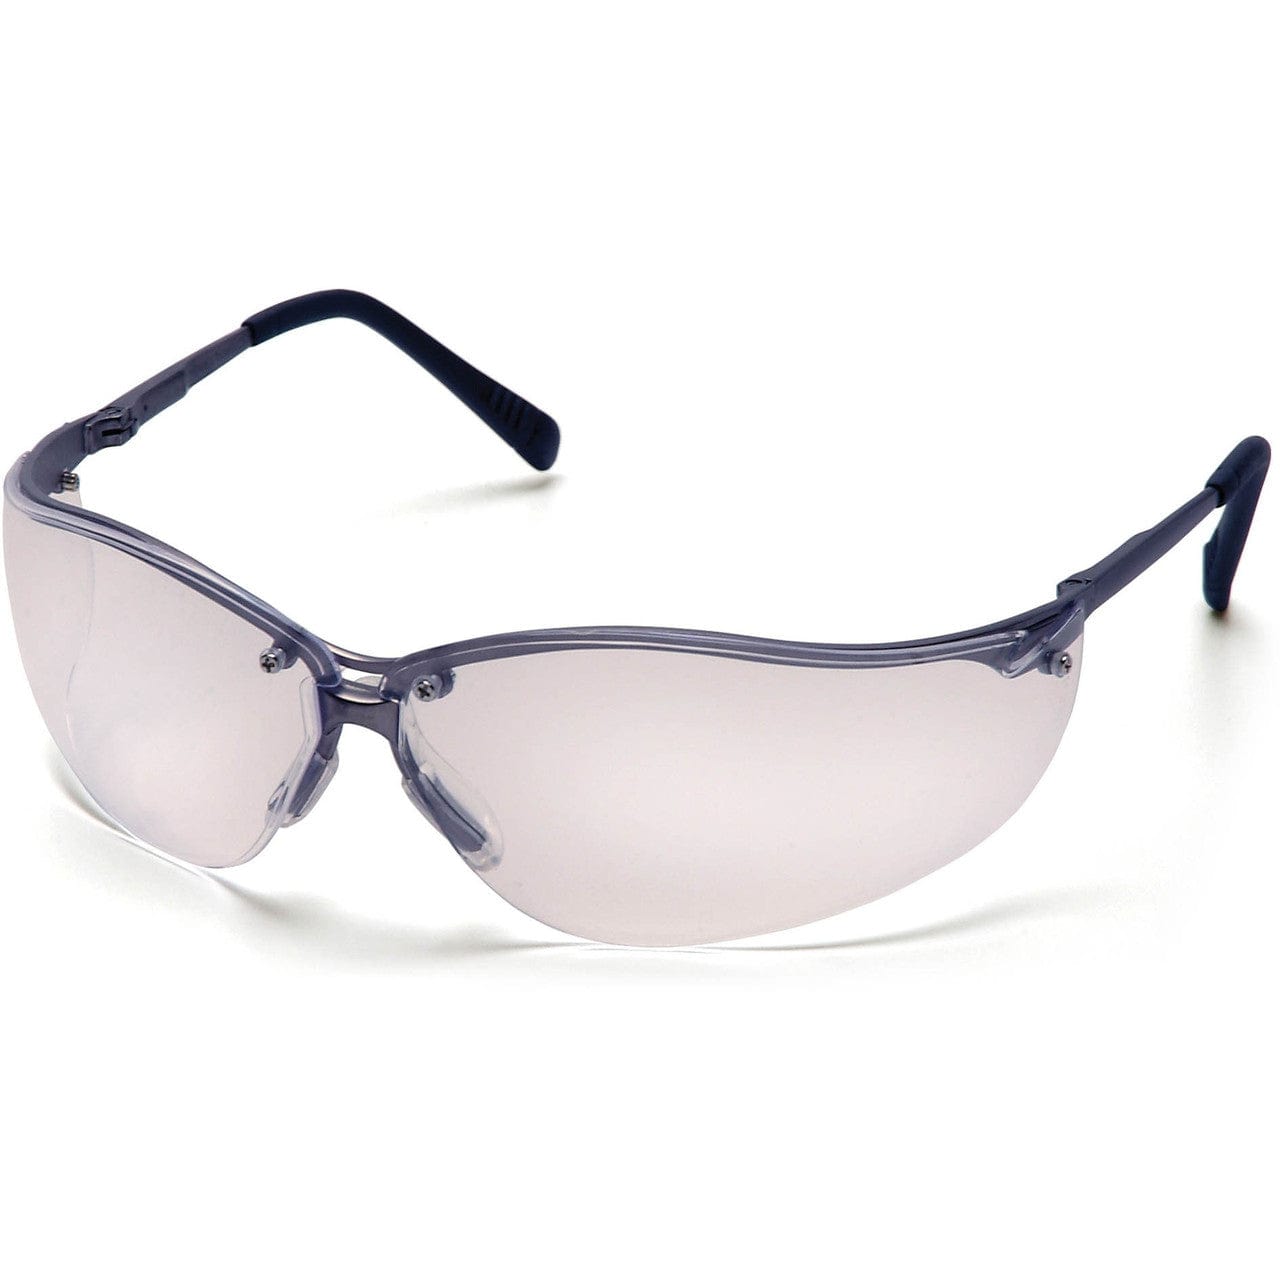 Pyramex V2 Metal Safety Glasses with Clear Lens SGM1810S